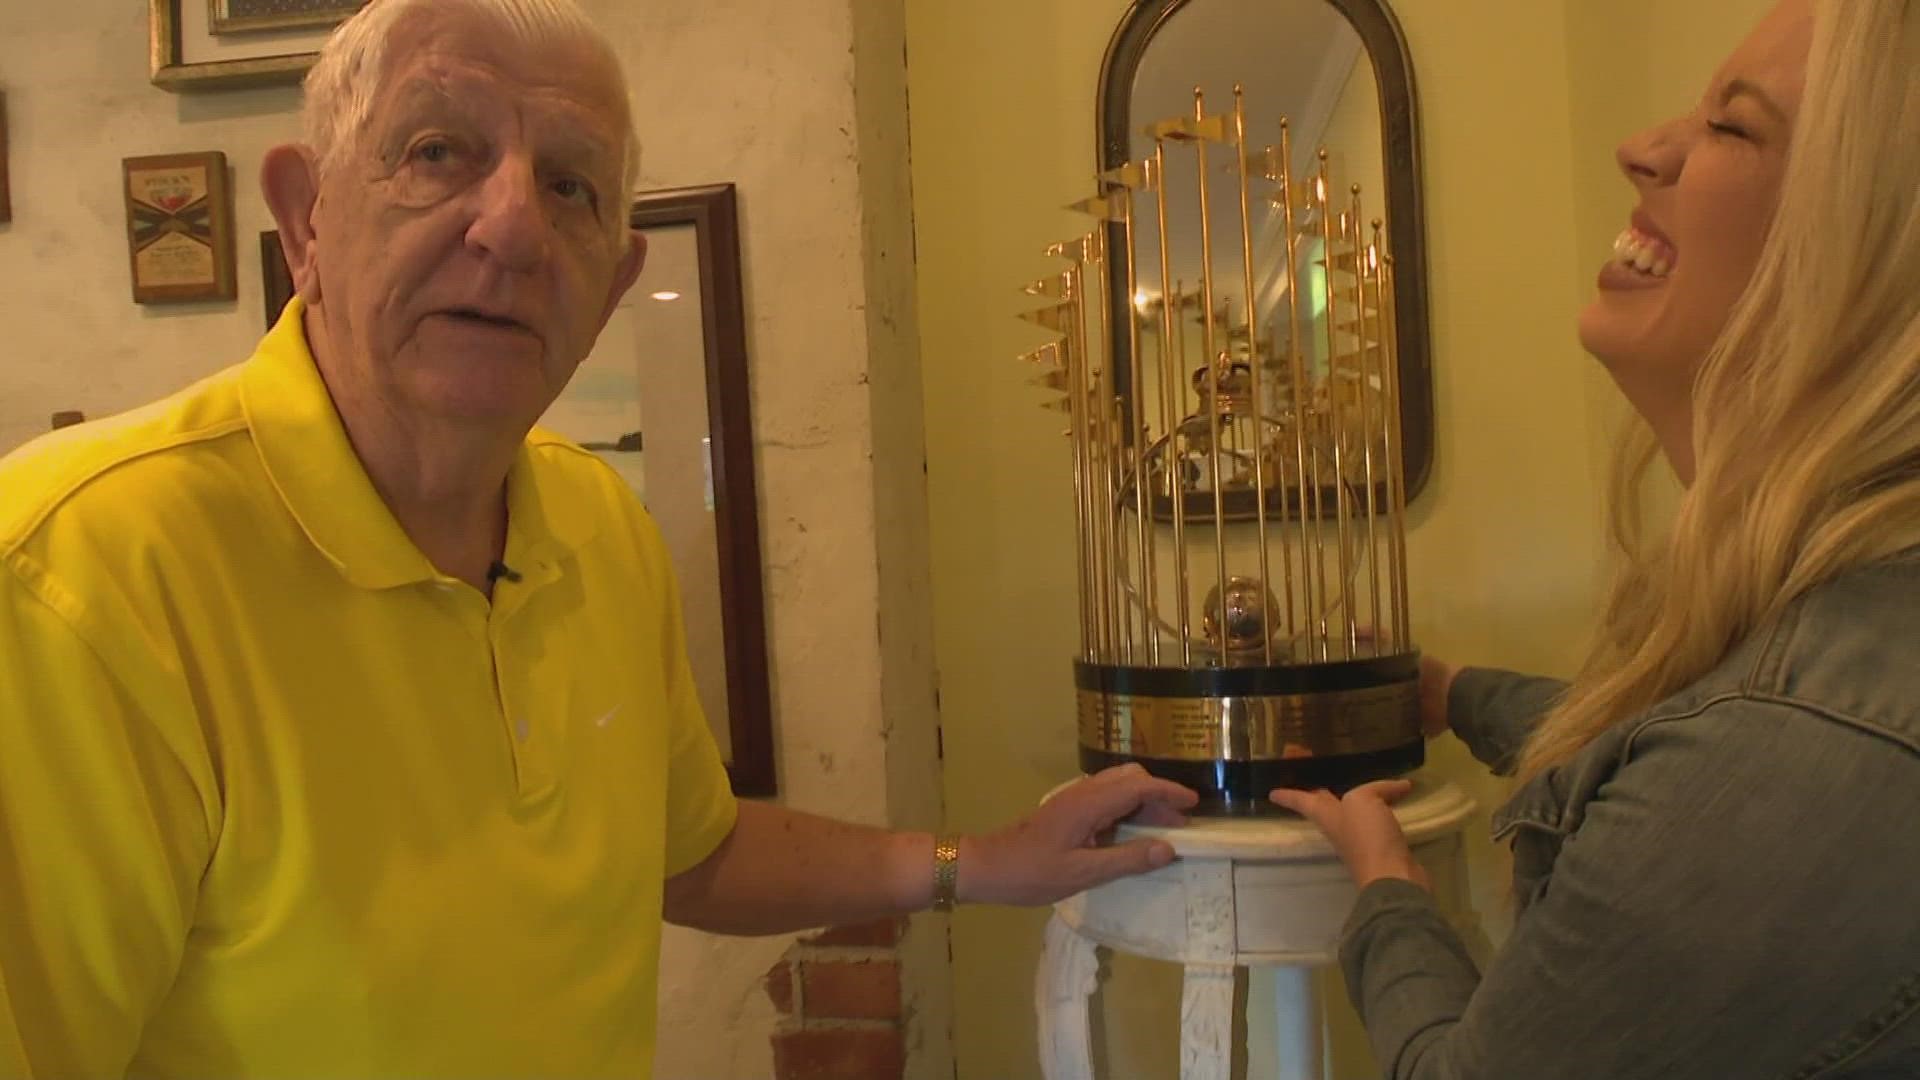 88-year-old Wes Stock has seen quite a bit over his life around the game of baseball.